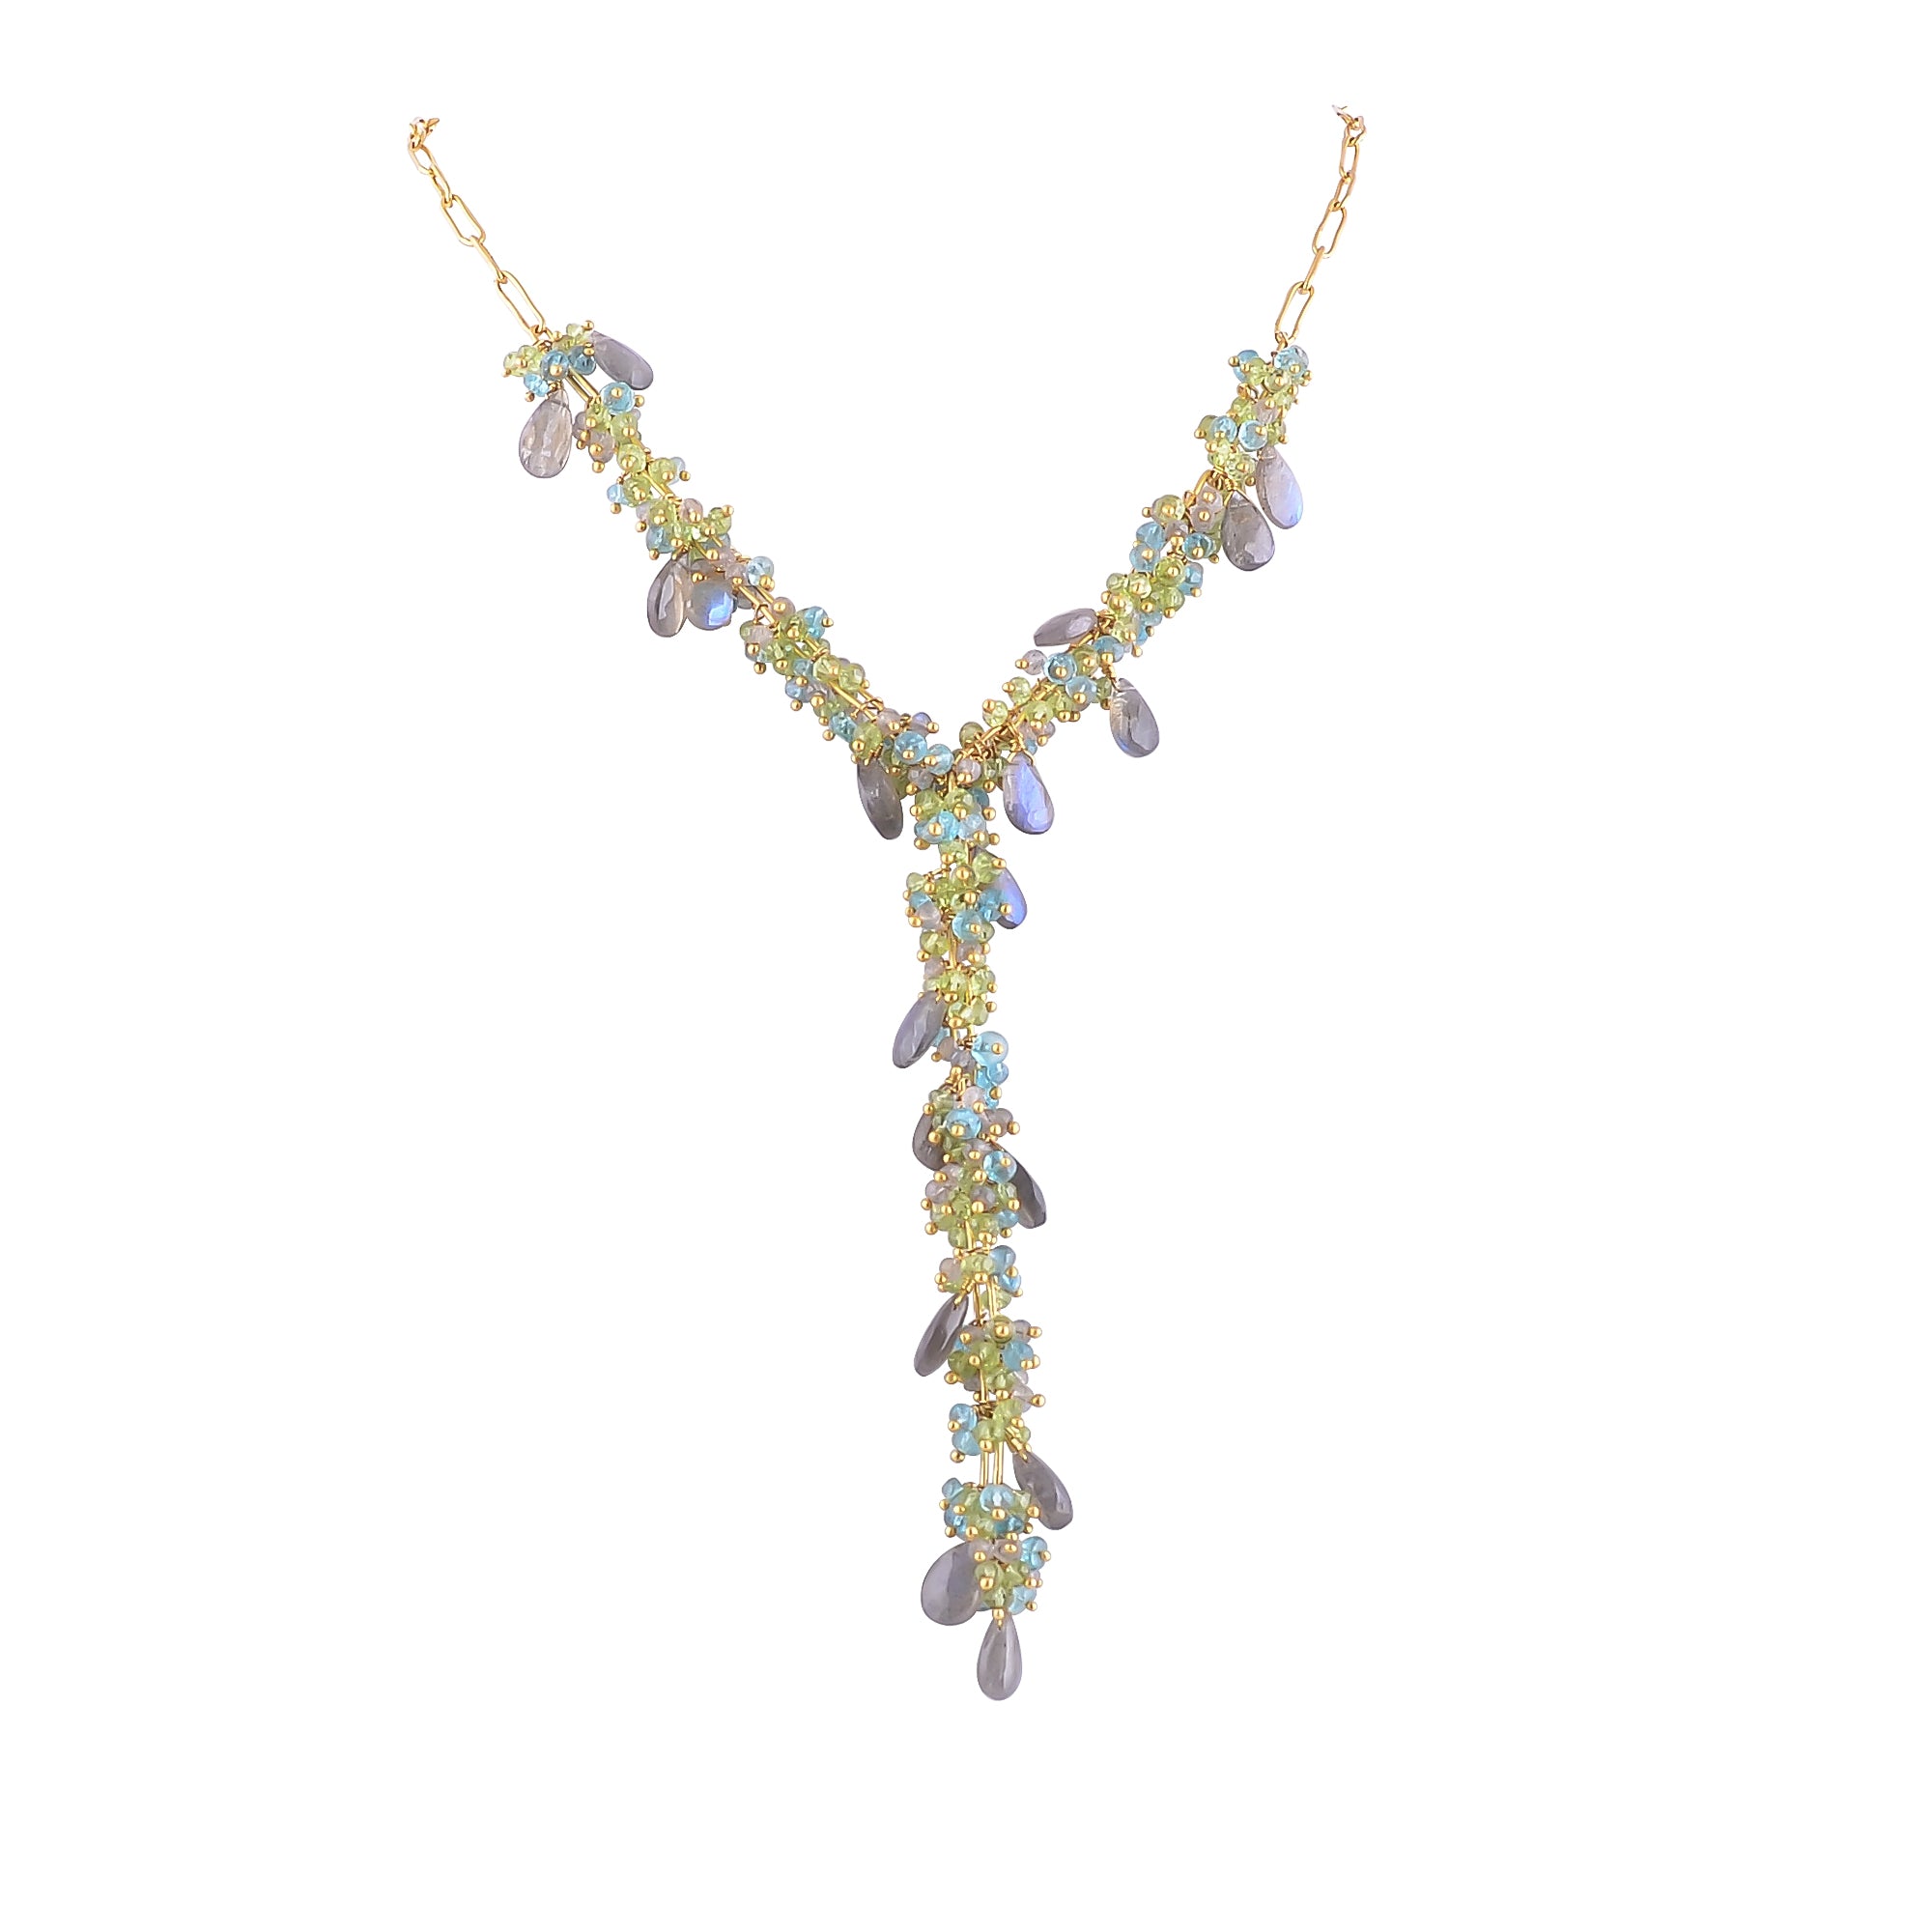 Buy Indian Handmade Silver Gold Plated Peridot/apetite/labrodarite Grape Cluster Necklace